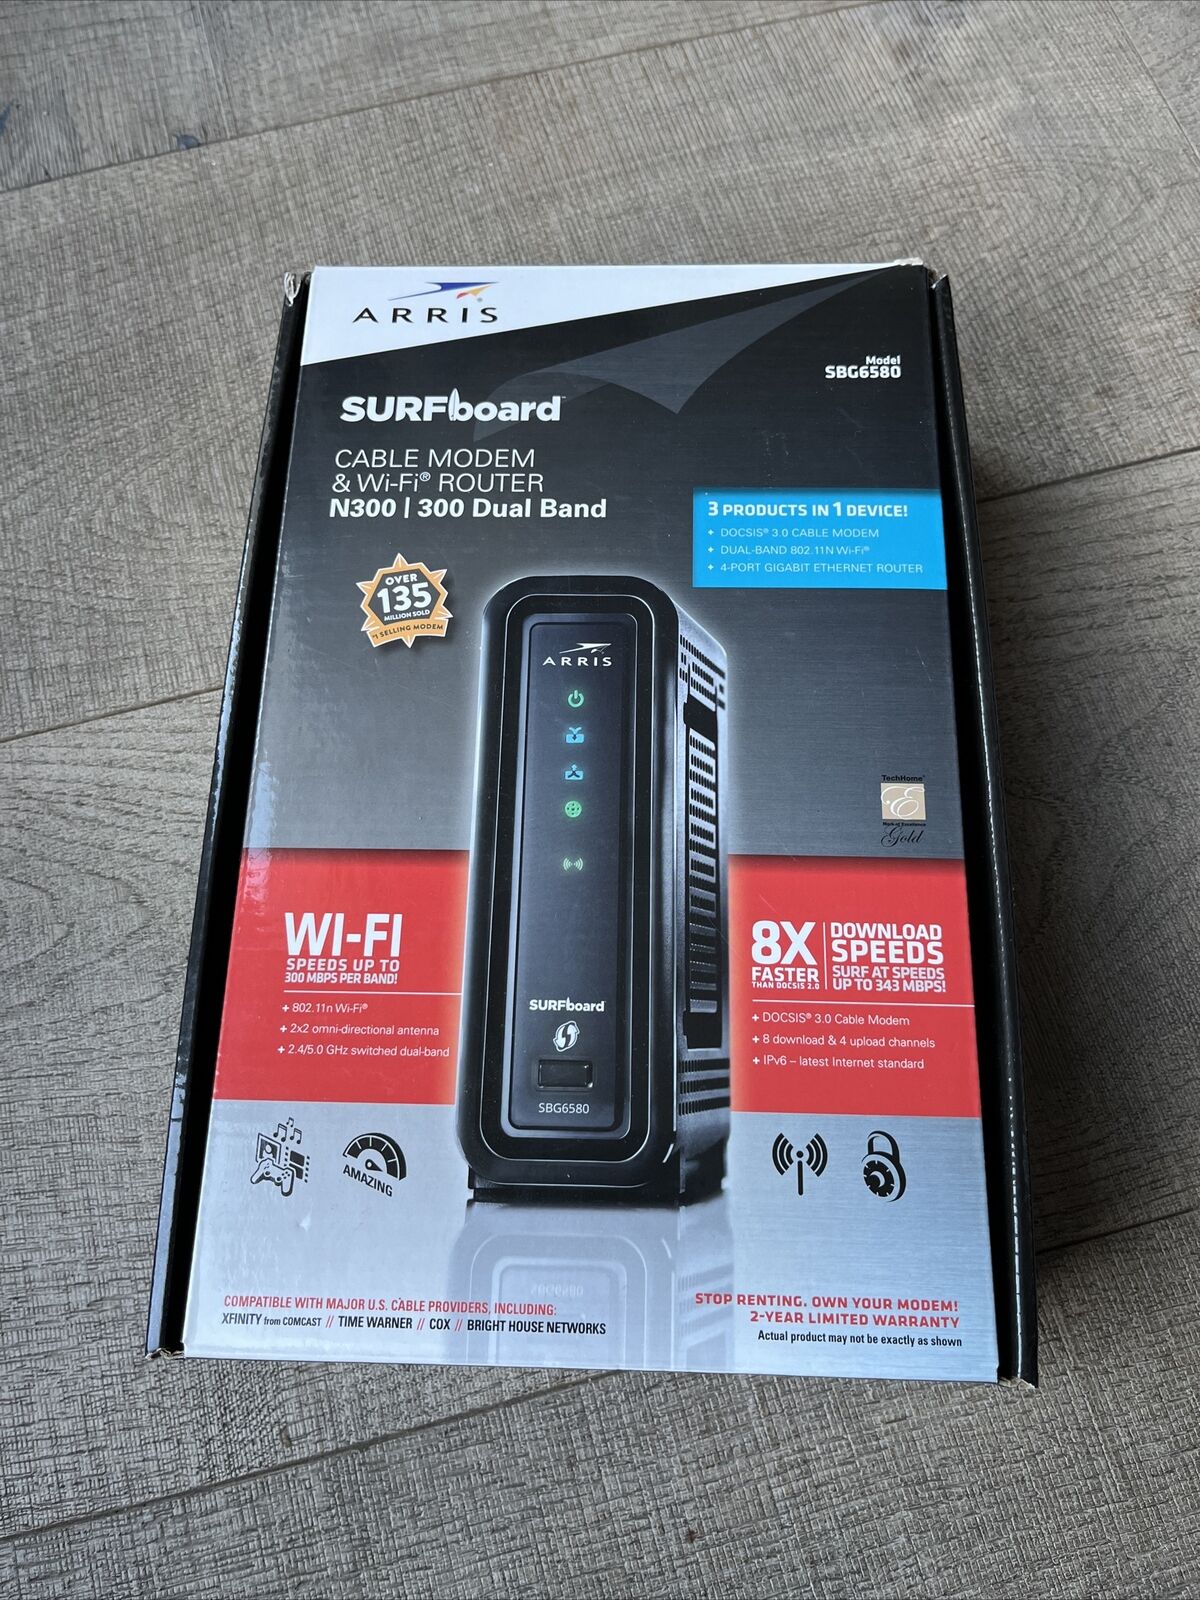 ARRIS Surfboard SBG-6580 N300/300 Dual Band Wireless Cable Modem & WI-FI Router